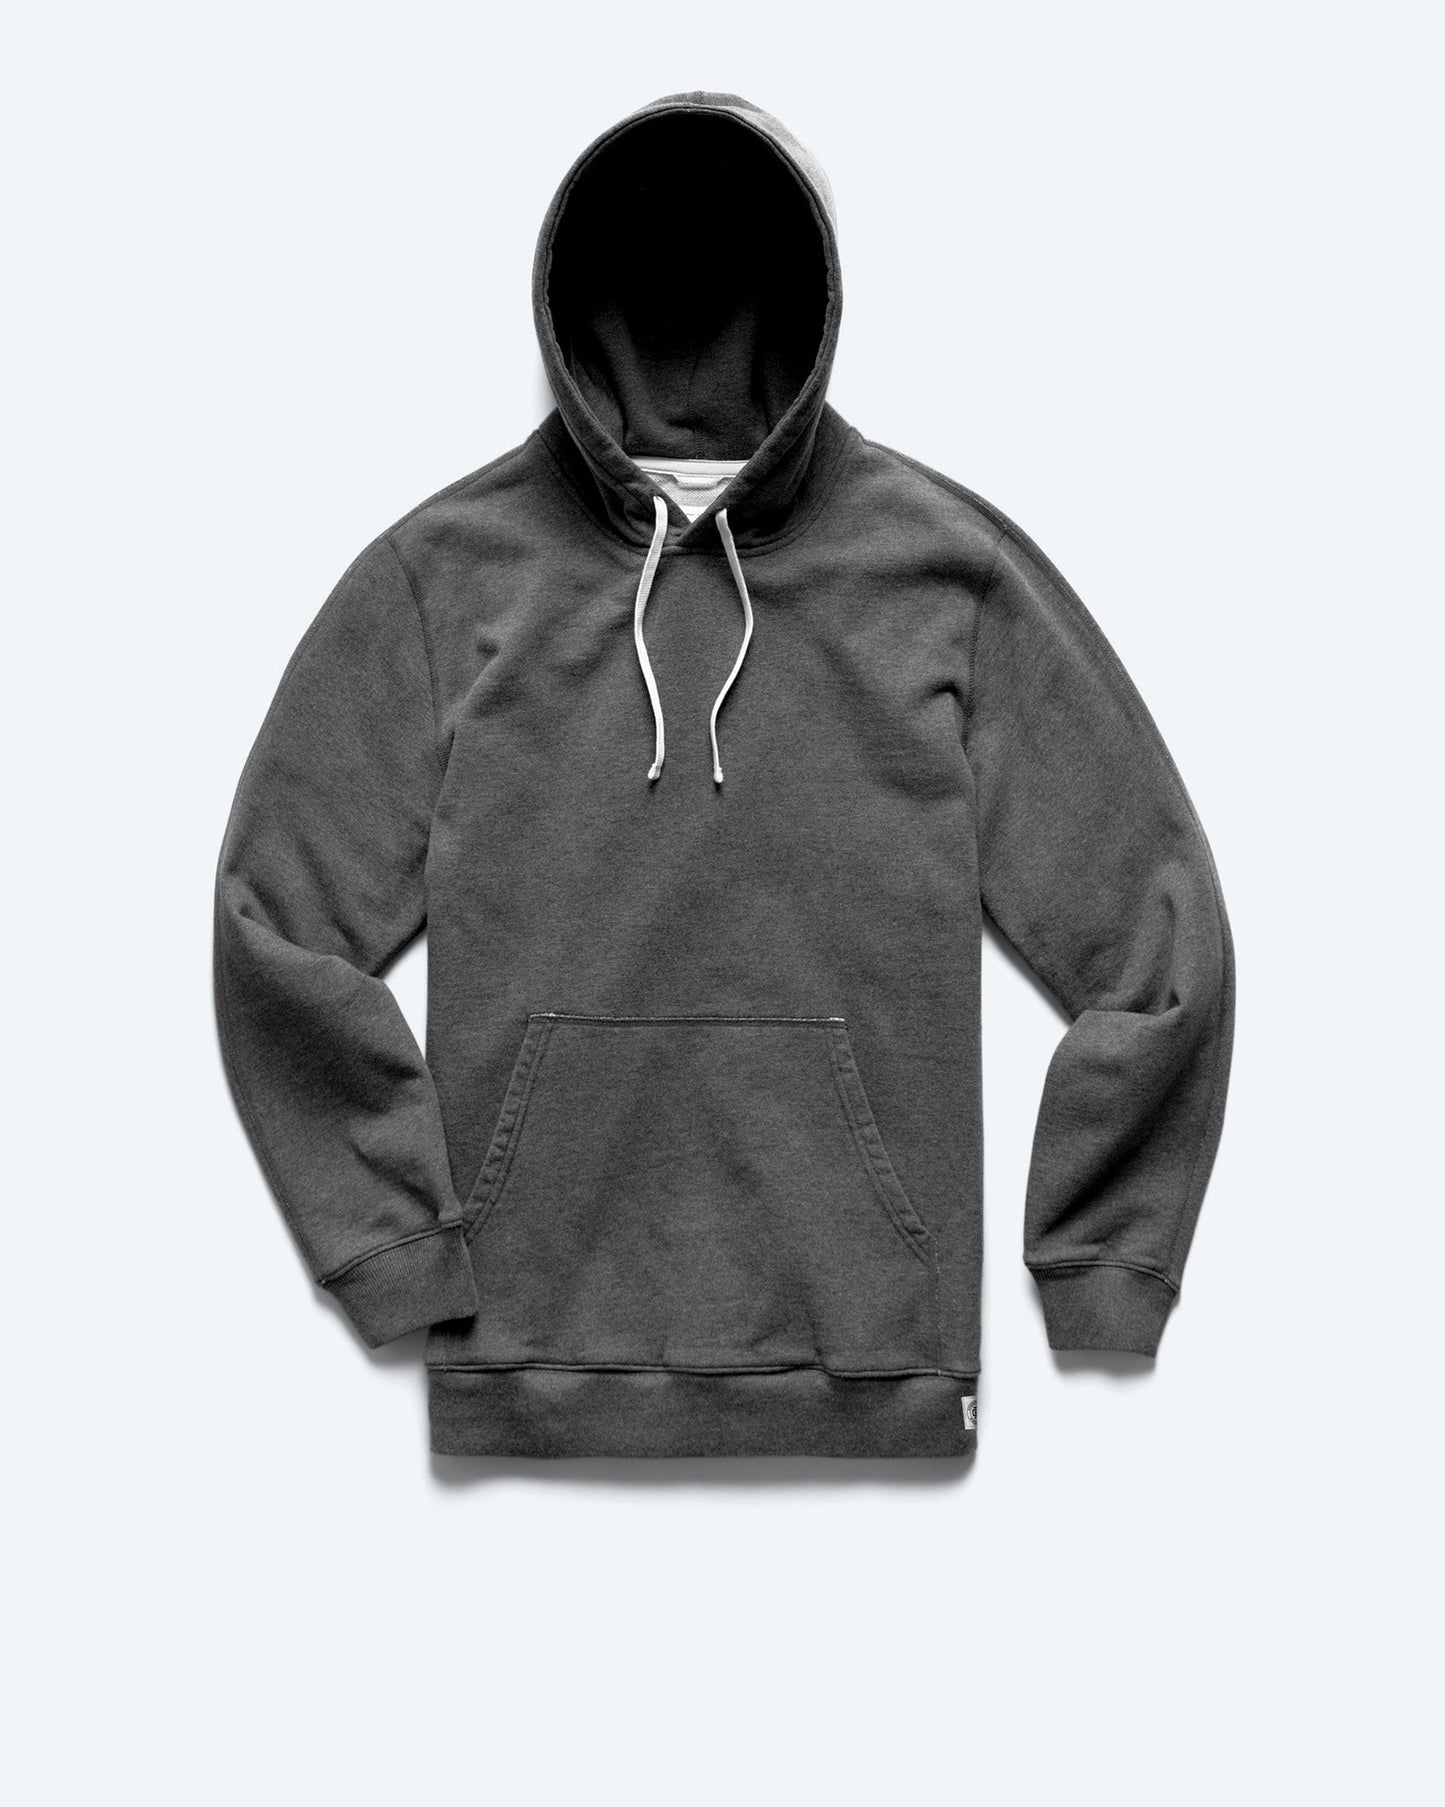 Reigning Champ Lightweight Terry Classic Pullover Hoodie Men Black S